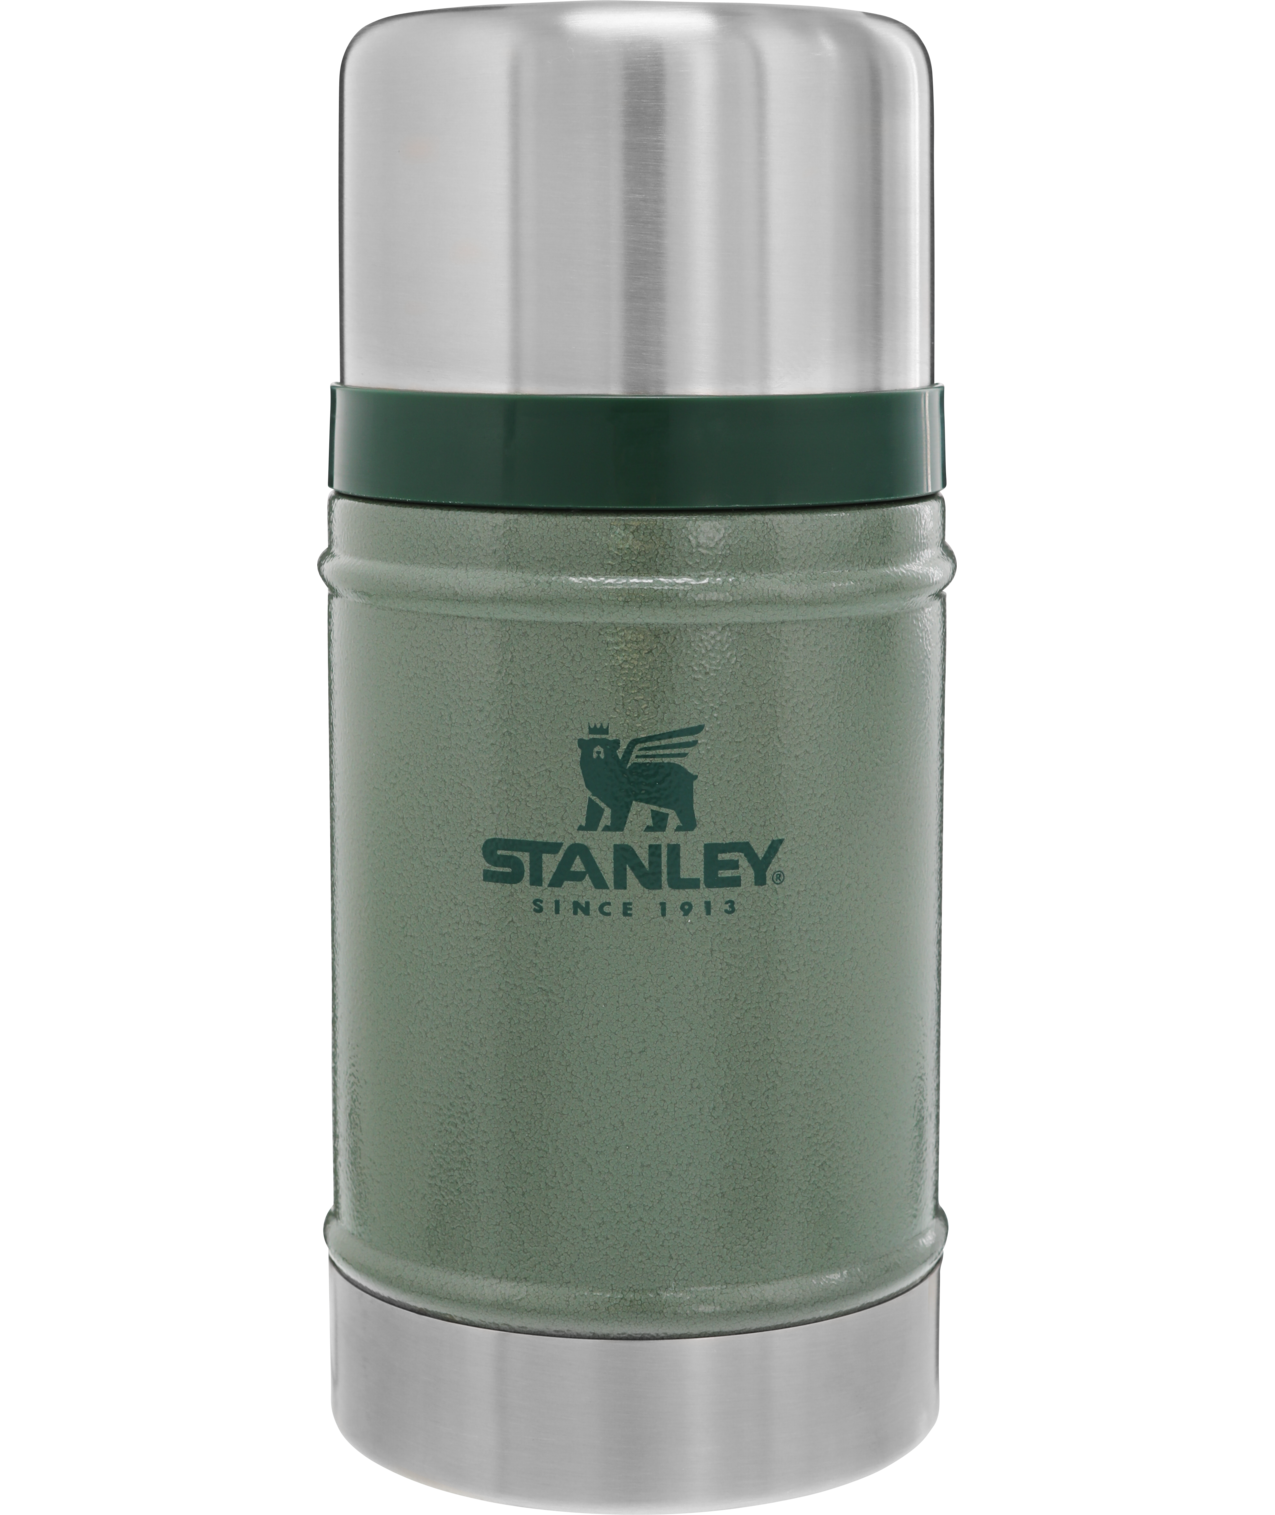 Thermos alimentaires Stanley